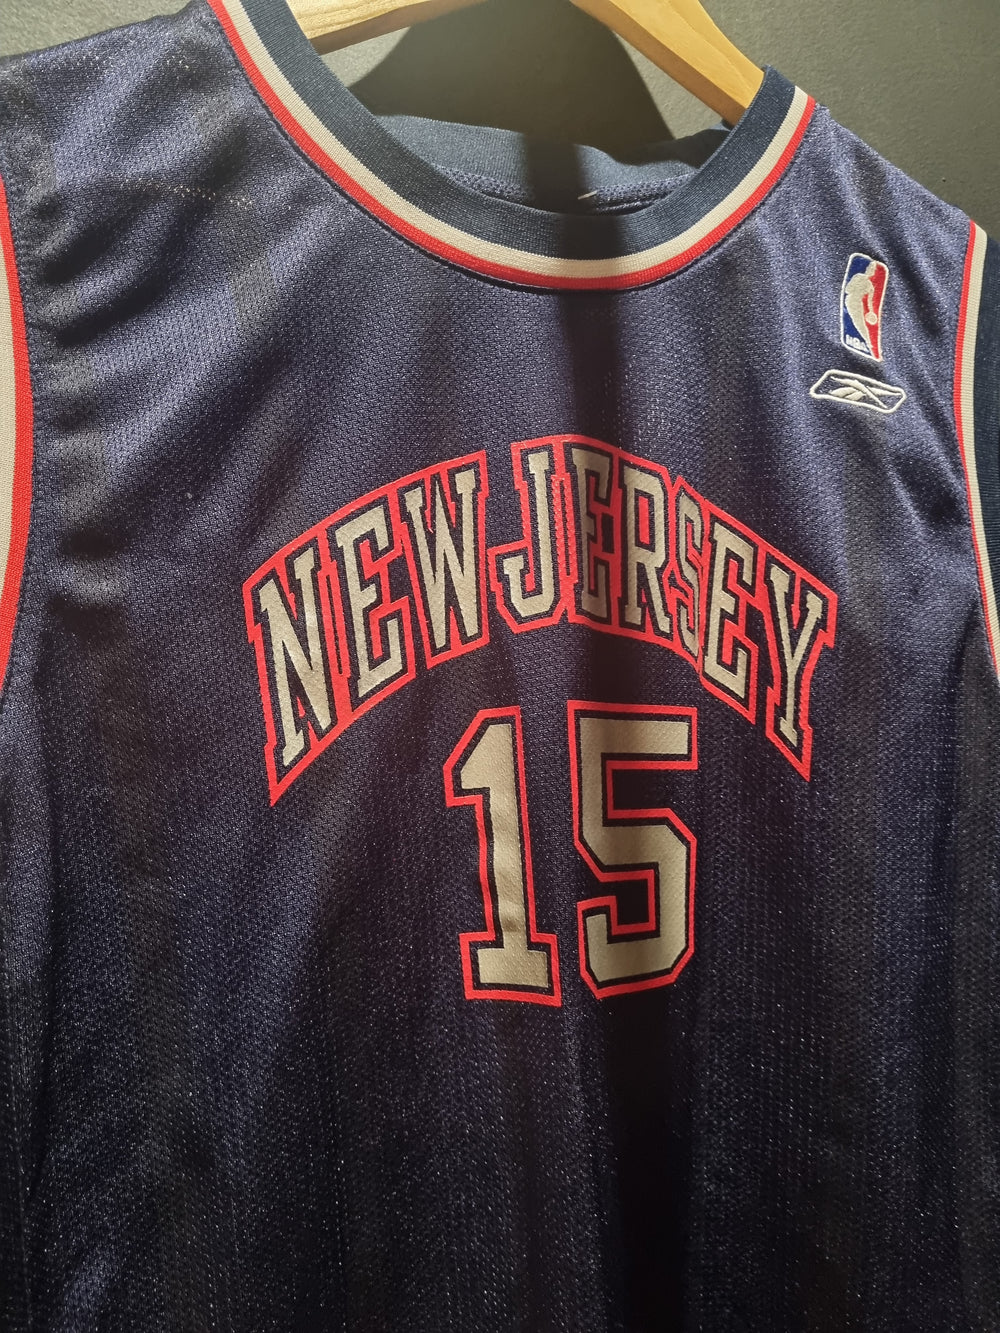 New Jersey Vince Carter Reebok Youth Large